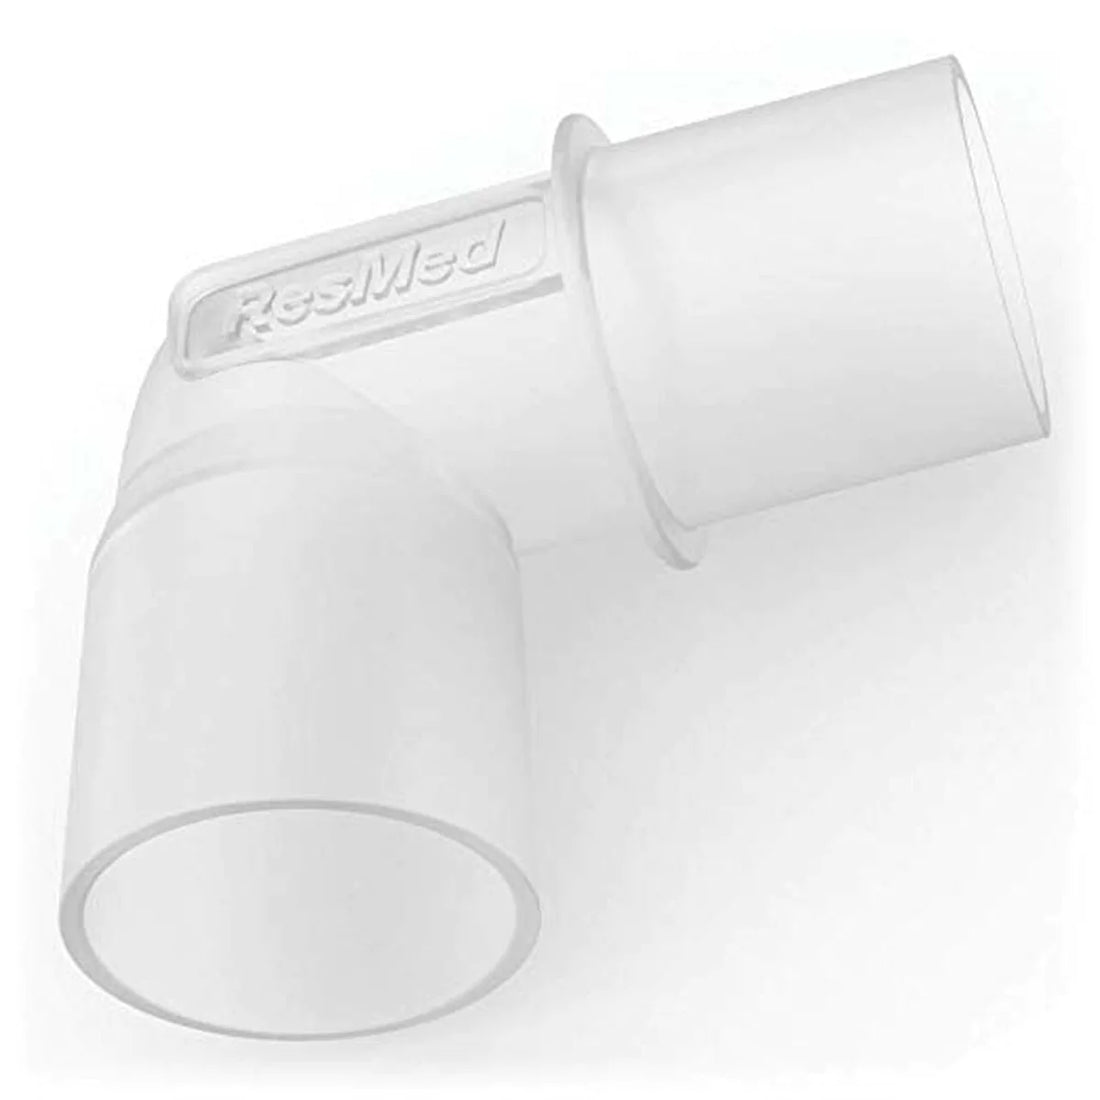 Tubing Elbow for AirSense and AirCurve 10 Machines